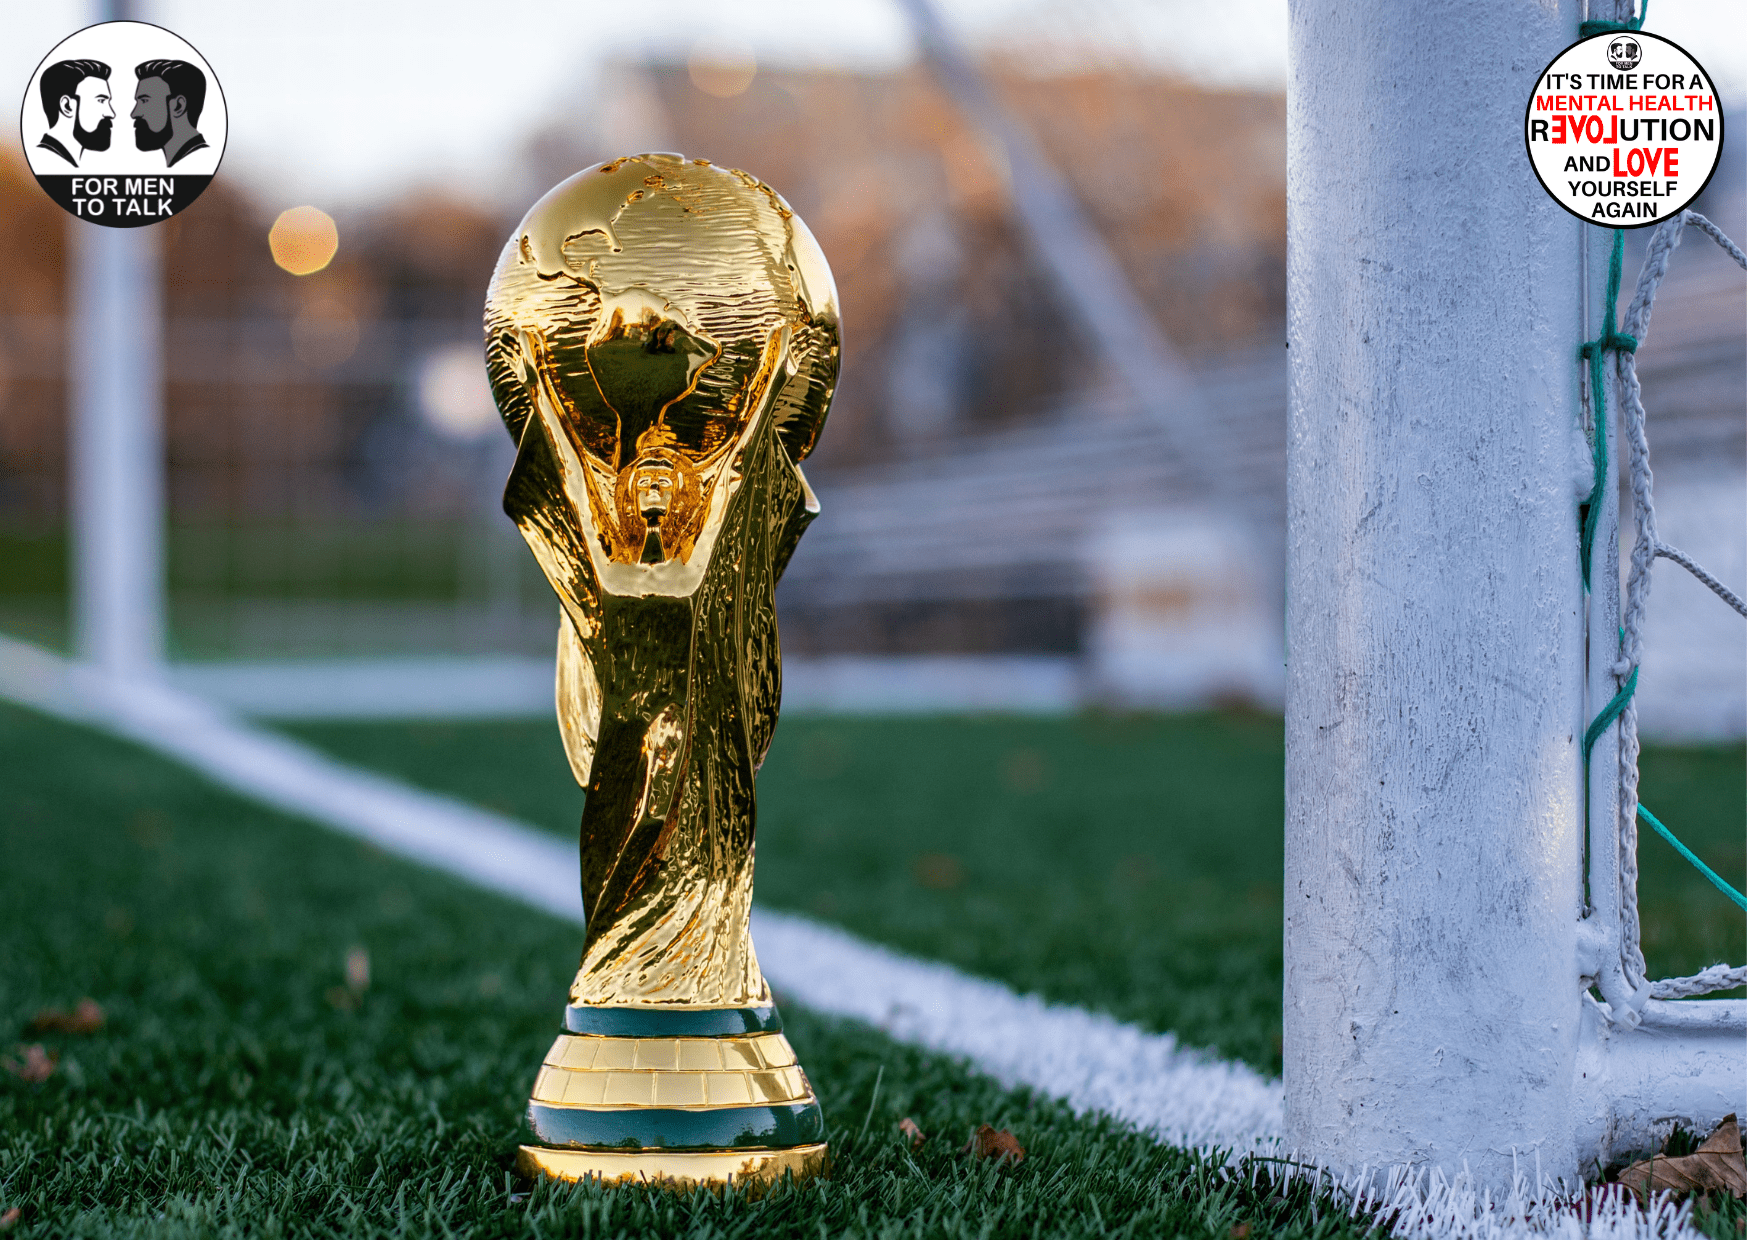 Holding the World Cup in Qatar is wrong but it’s still important to watch the finals.